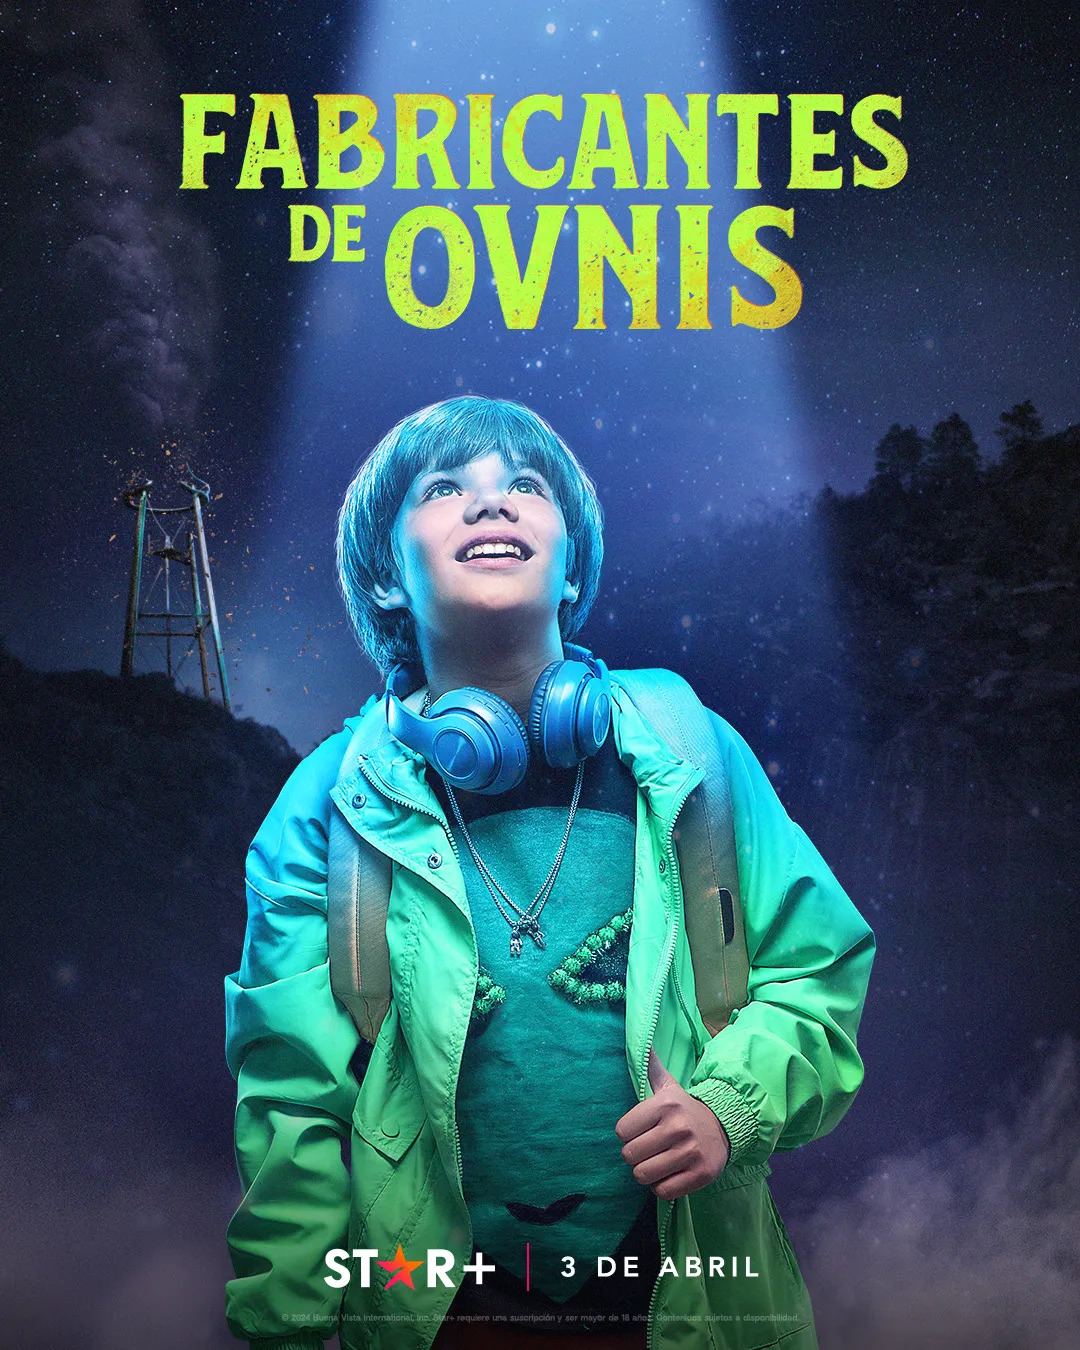 Extra Large TV Poster Image for Fabricante de ovnis (#10 of 11)